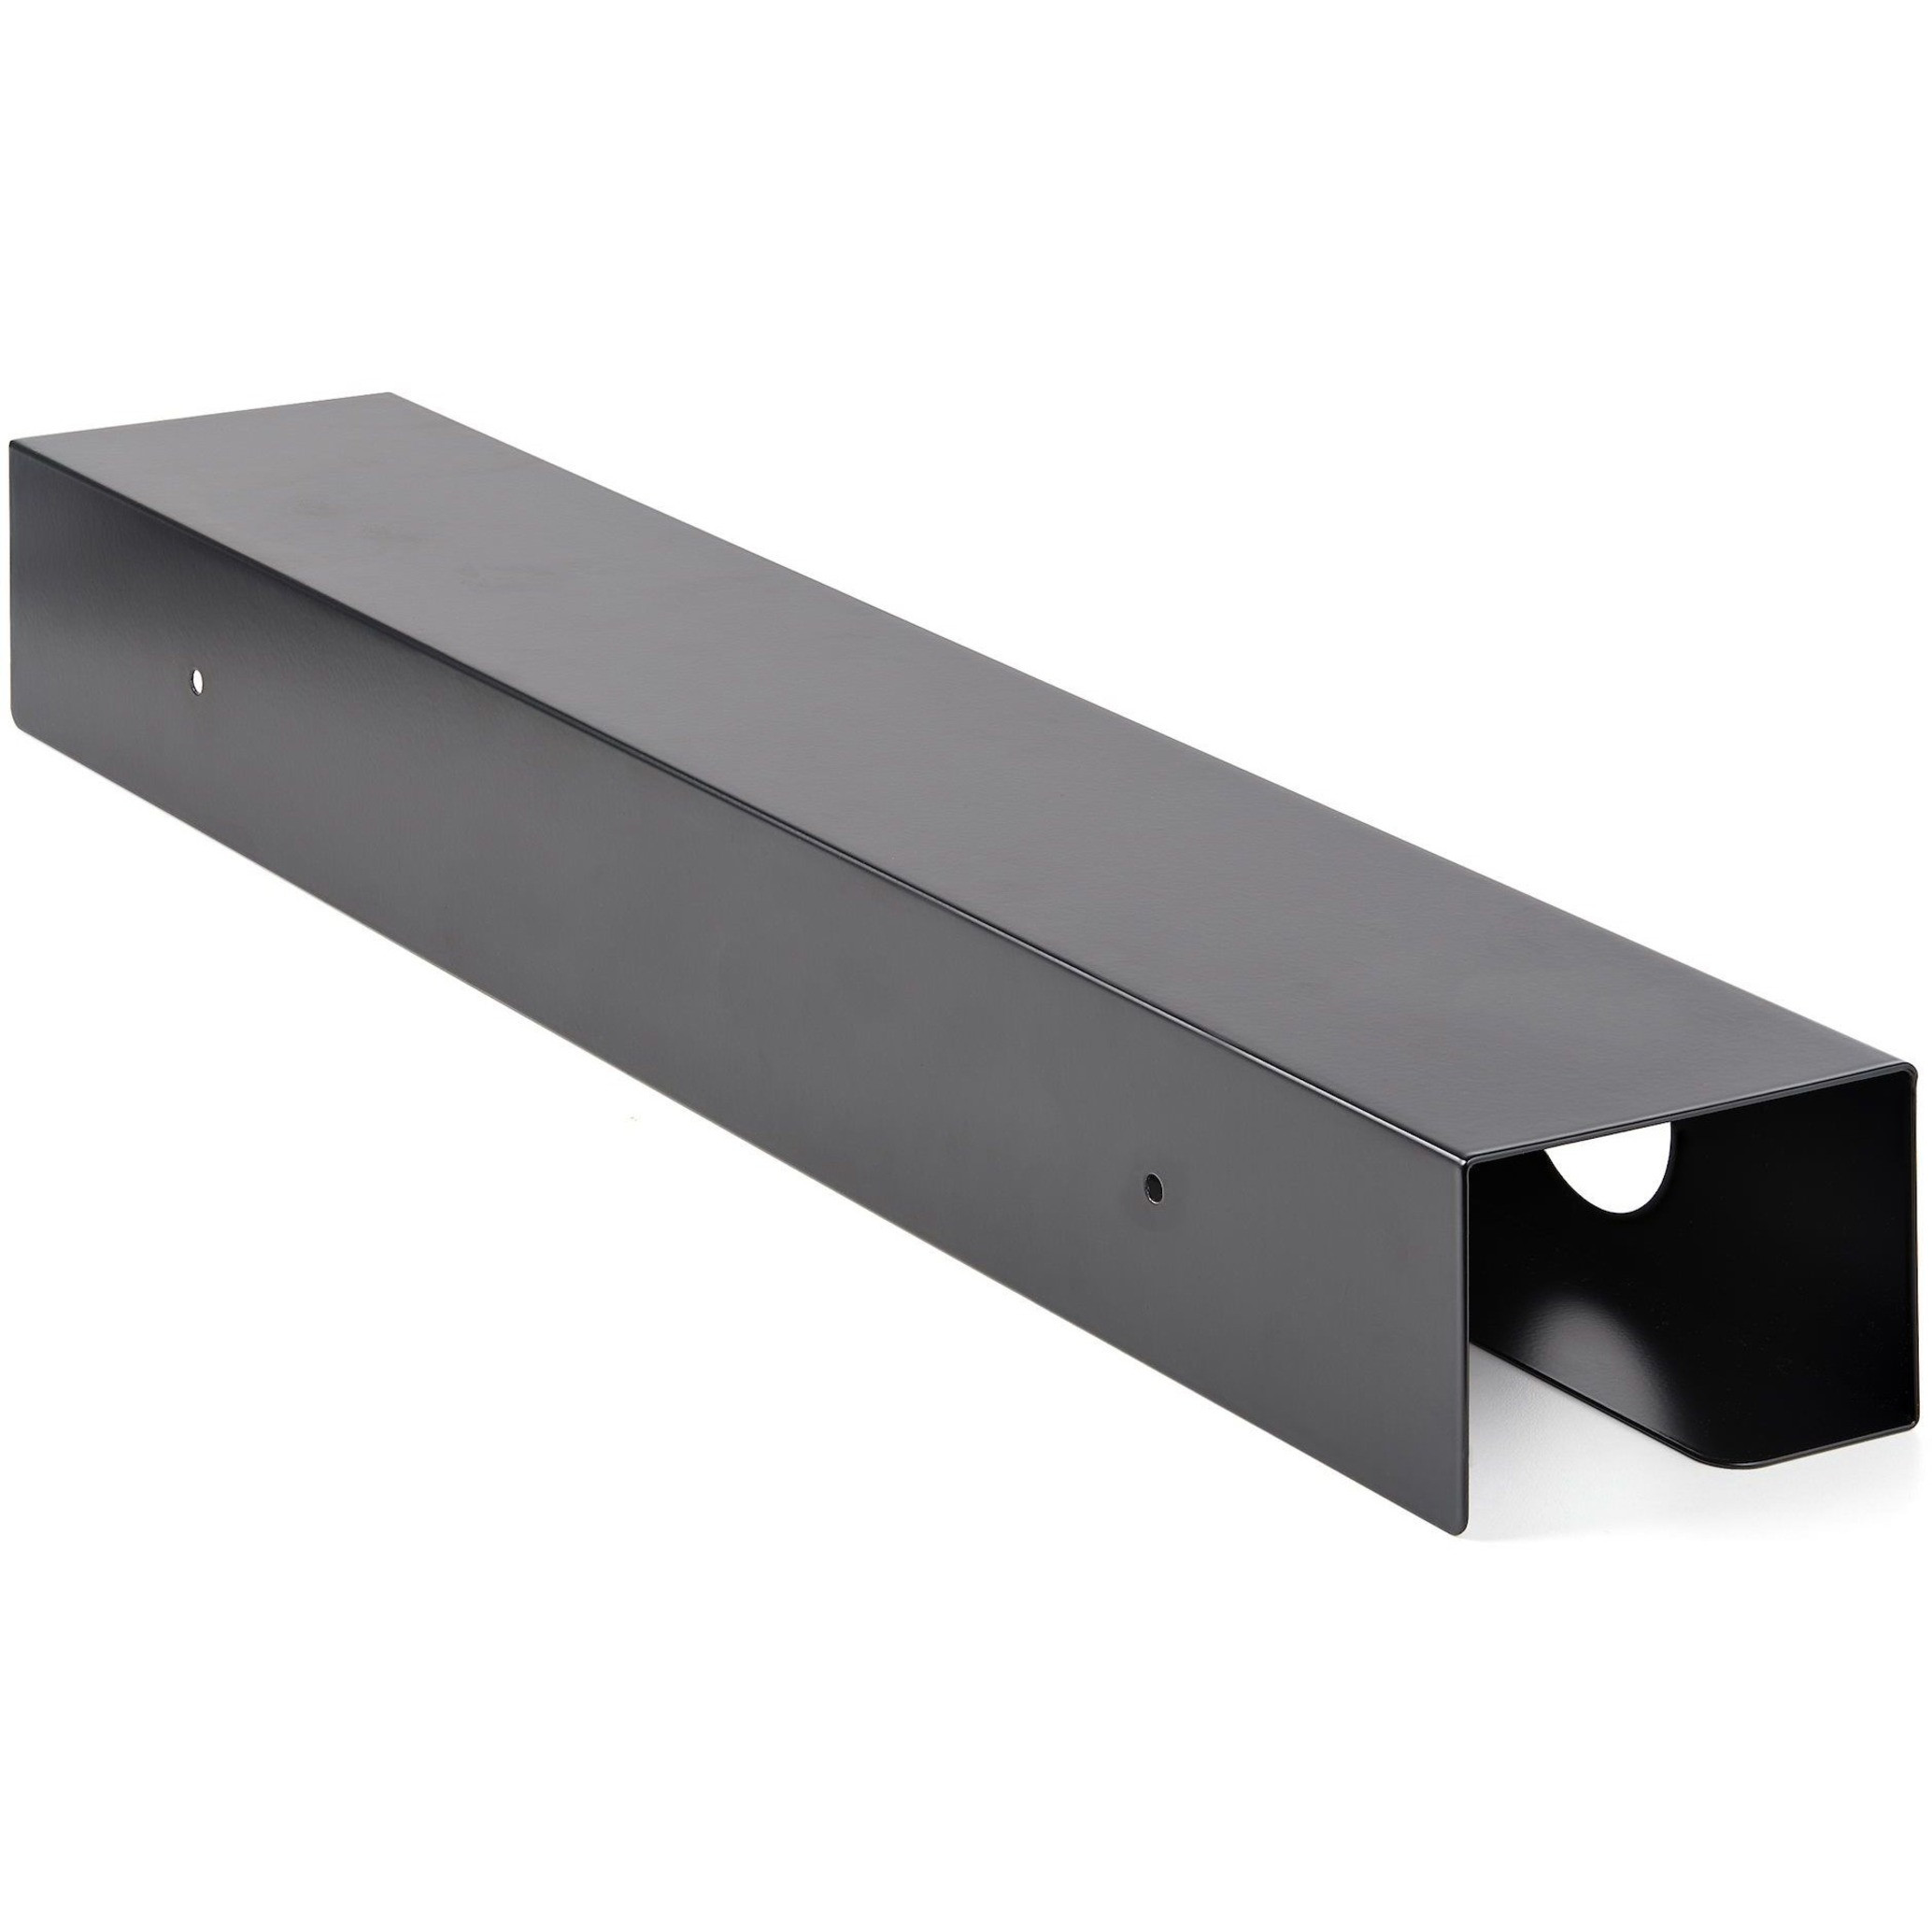 Cable Tray – Under Surface Mounted